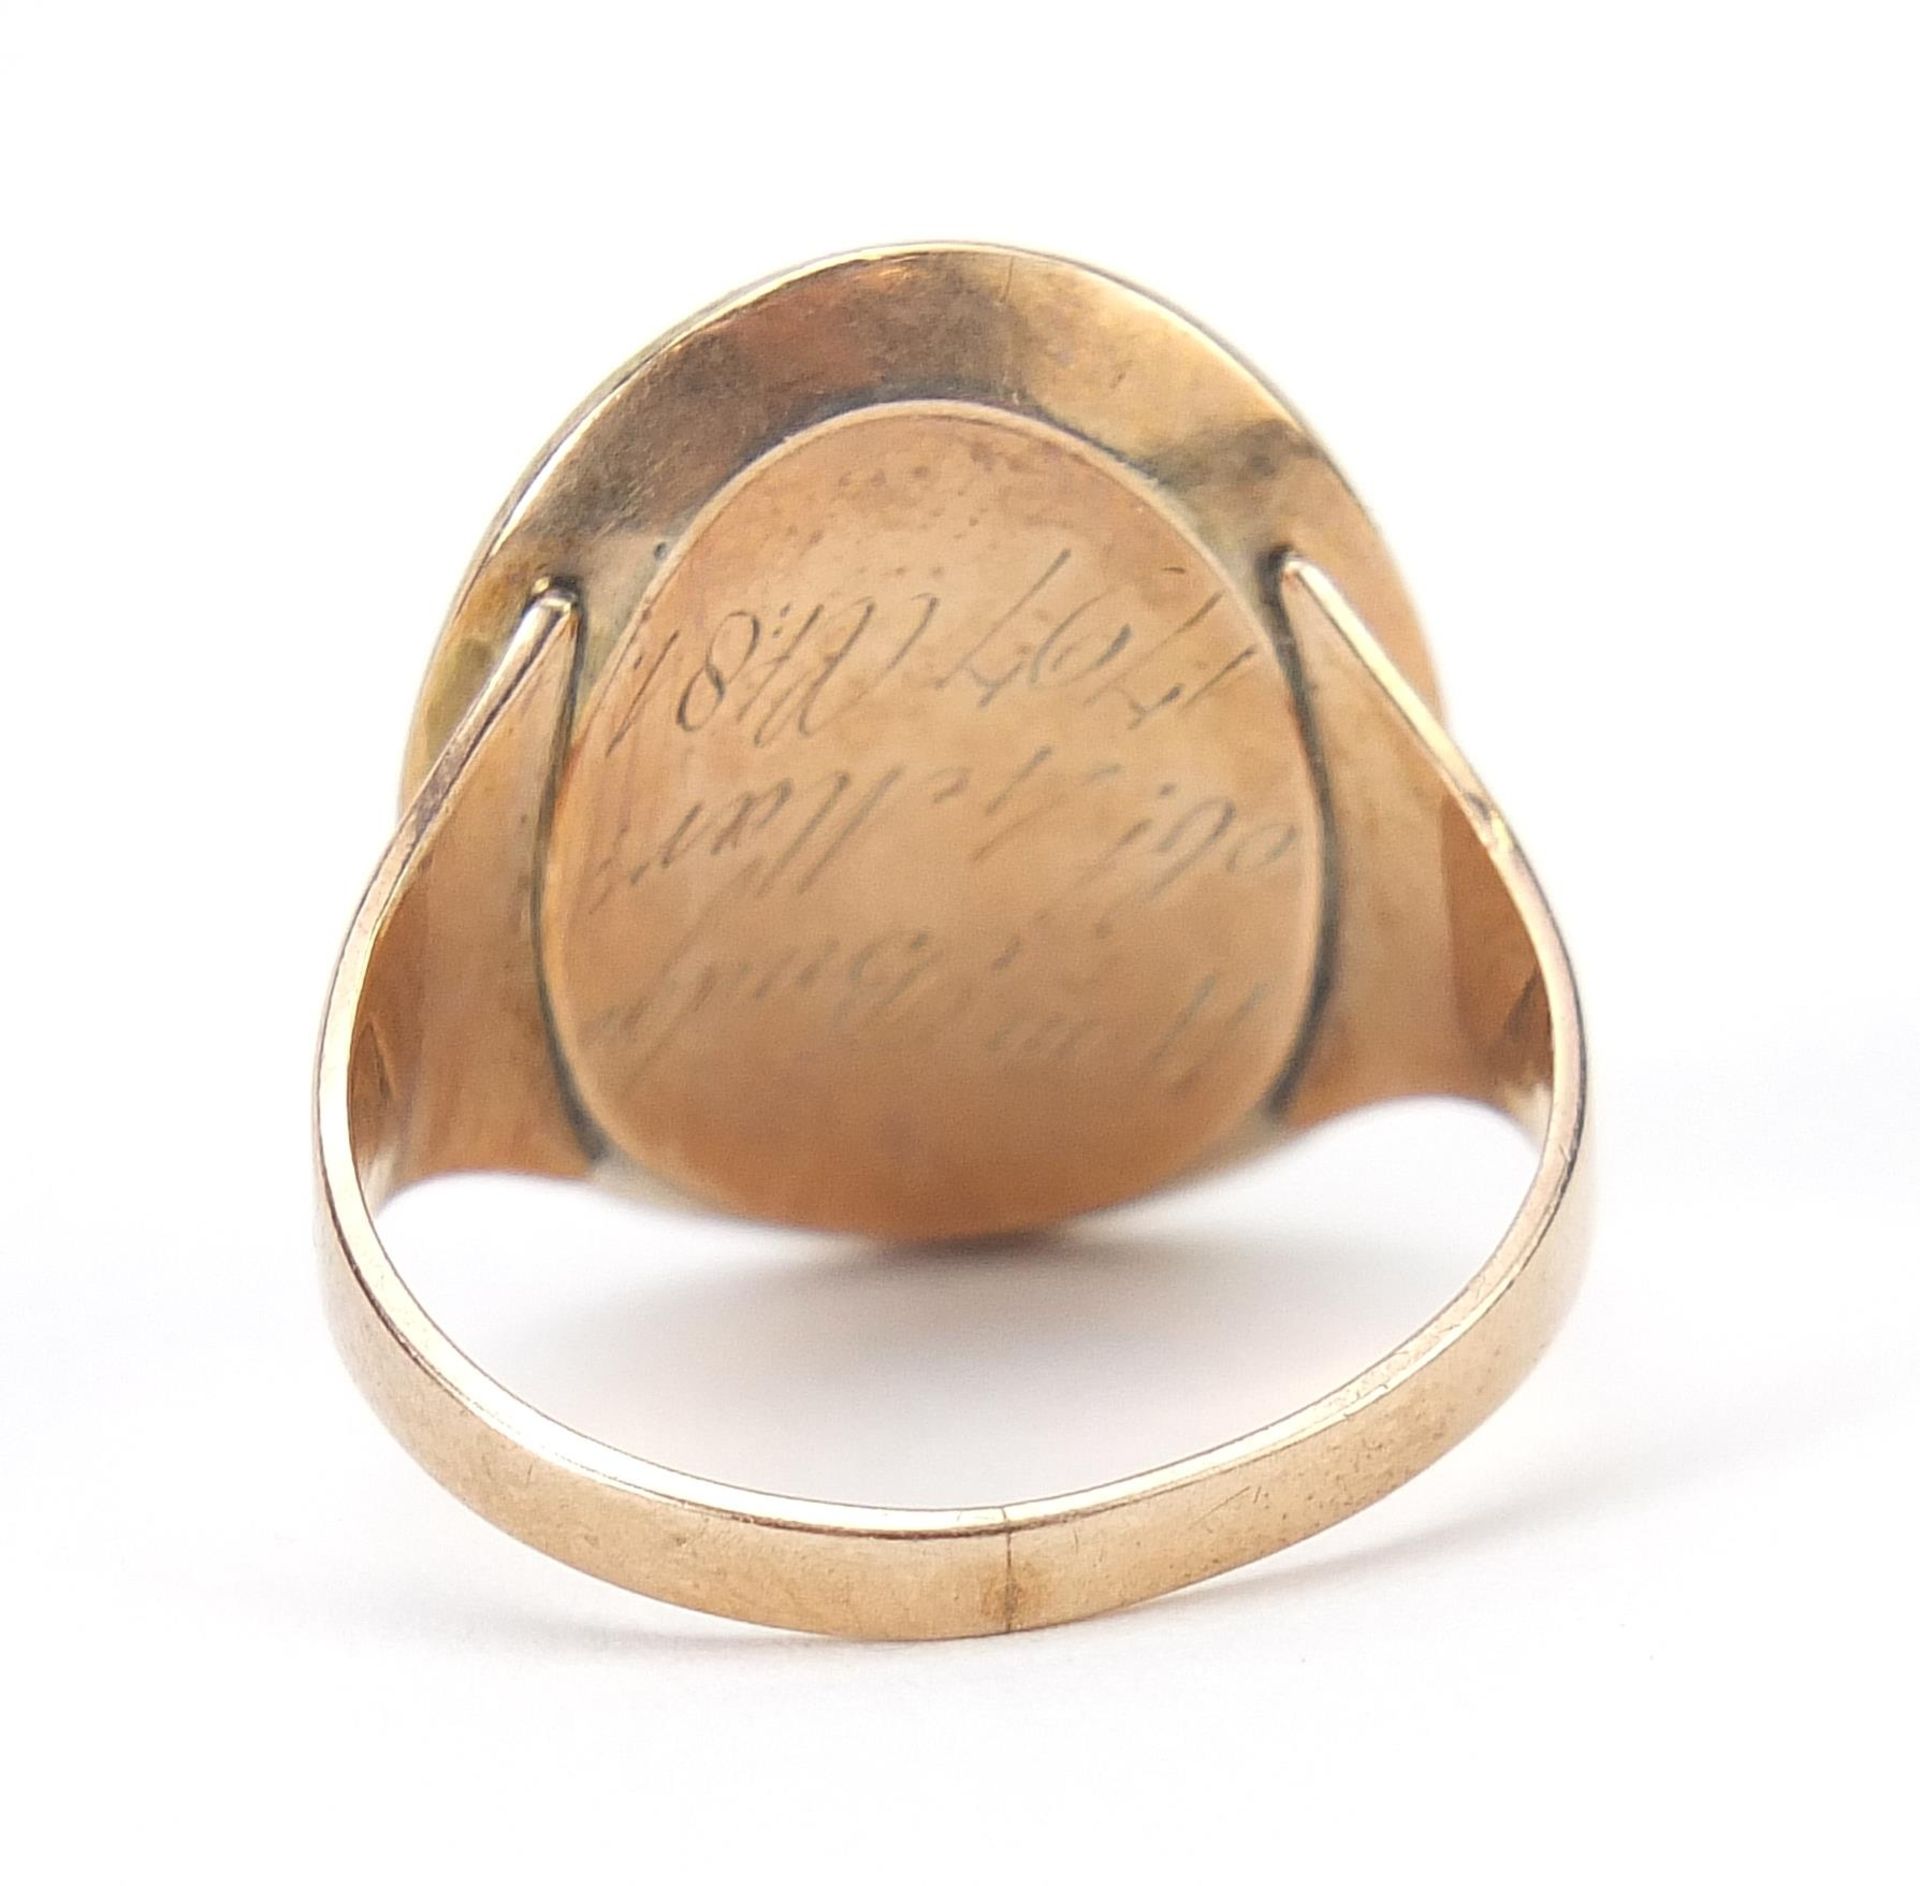 Georgian unmarked gold mourning ring with plaited hair, engraved William Bridge obt 4th March 1797 - Image 3 of 5